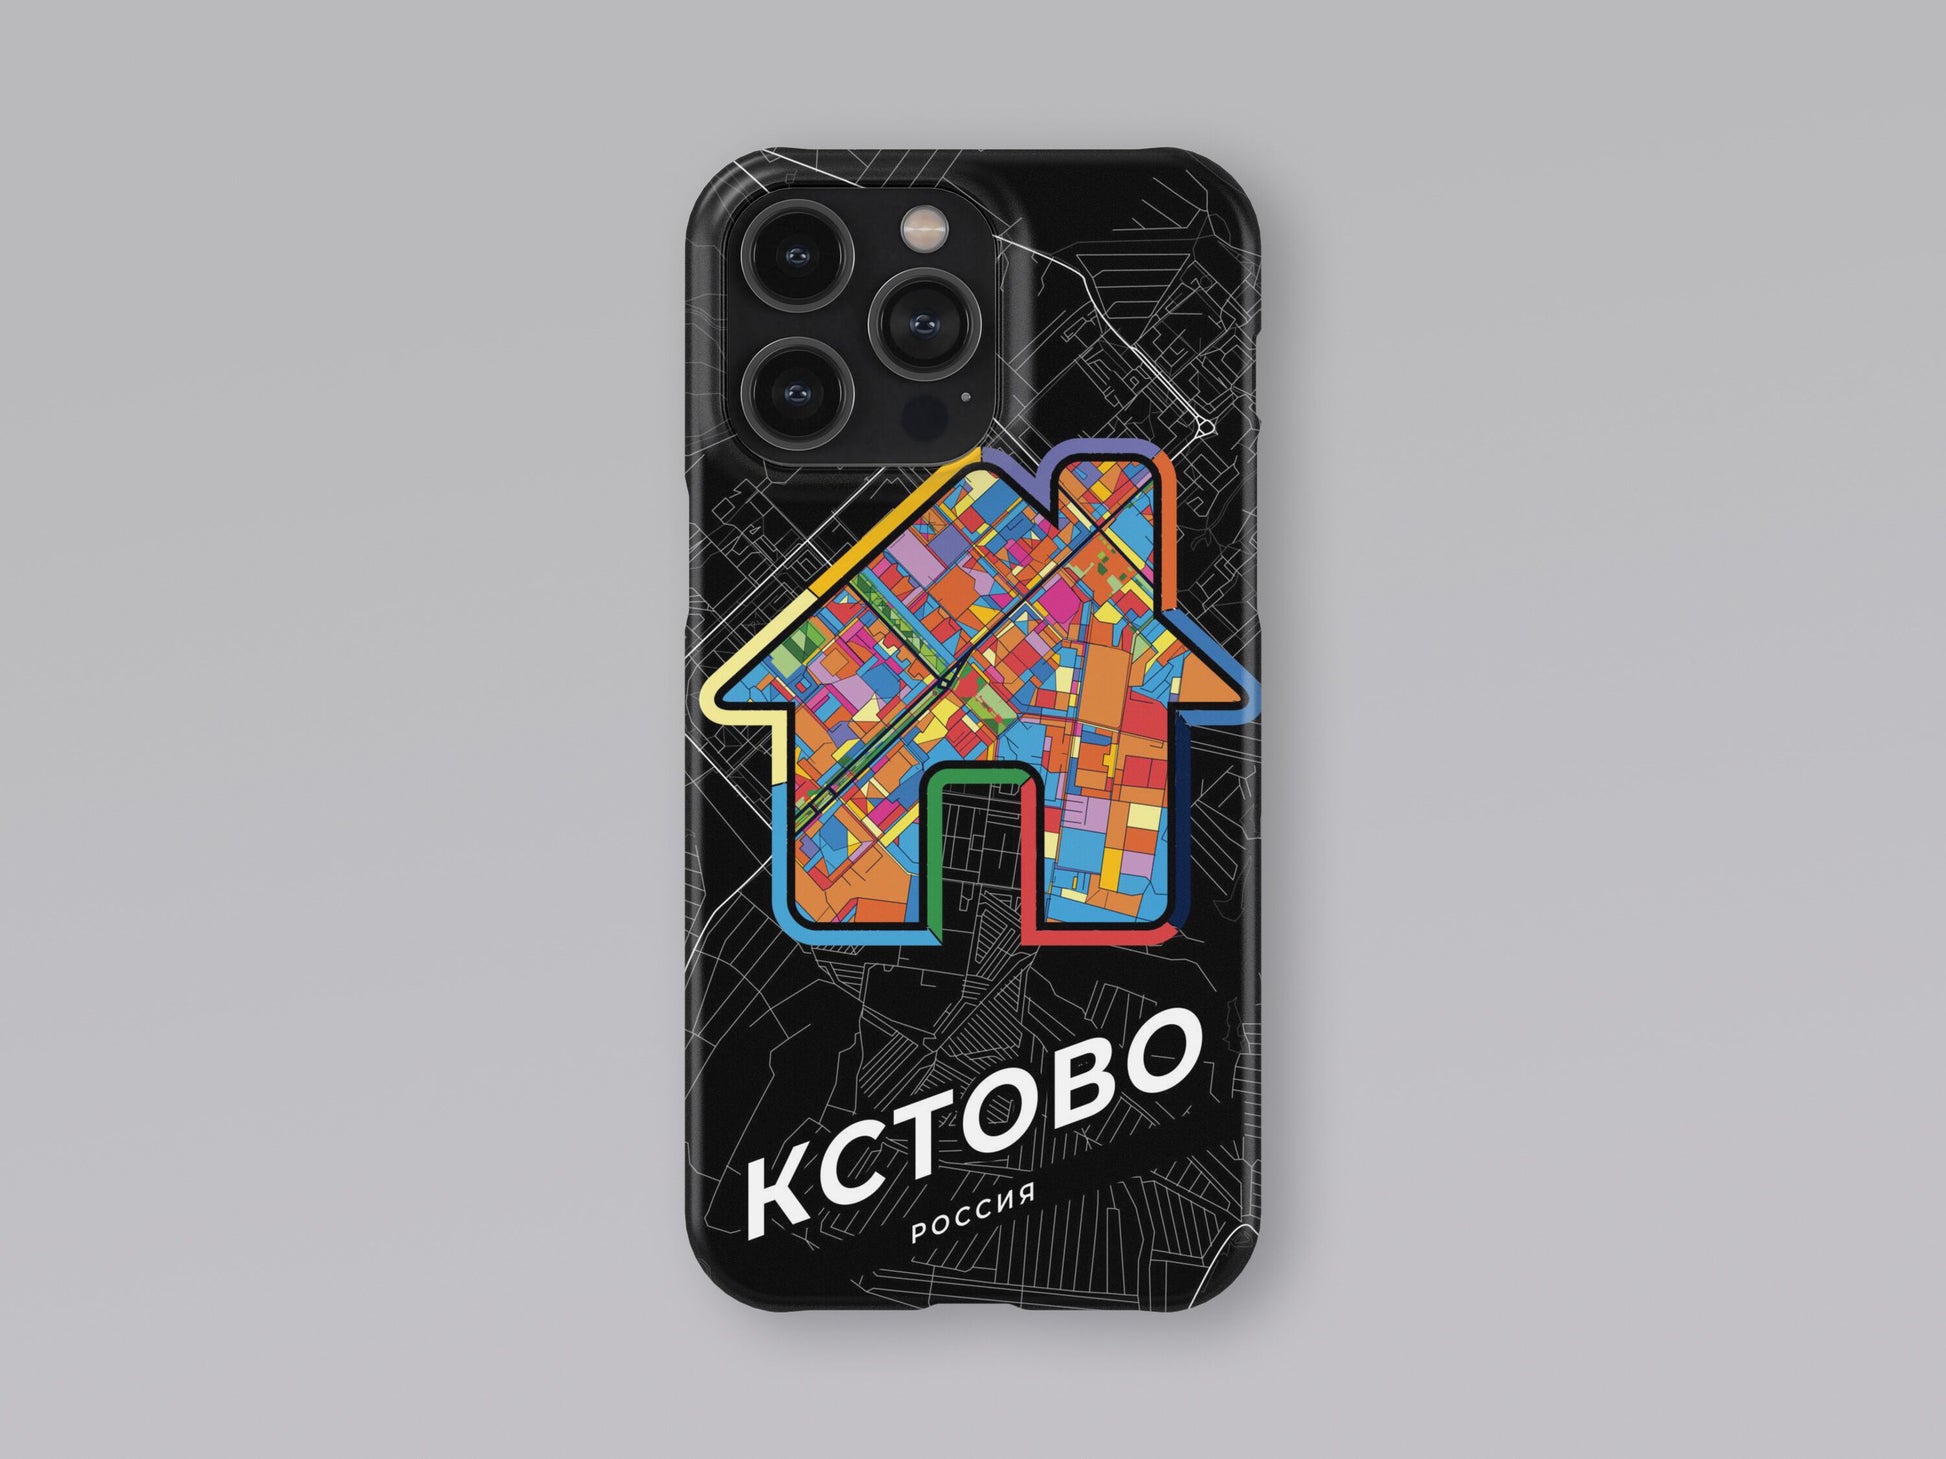 Kstovo Russia slim phone case with colorful icon. Birthday, wedding or housewarming gift. Couple match cases. 3